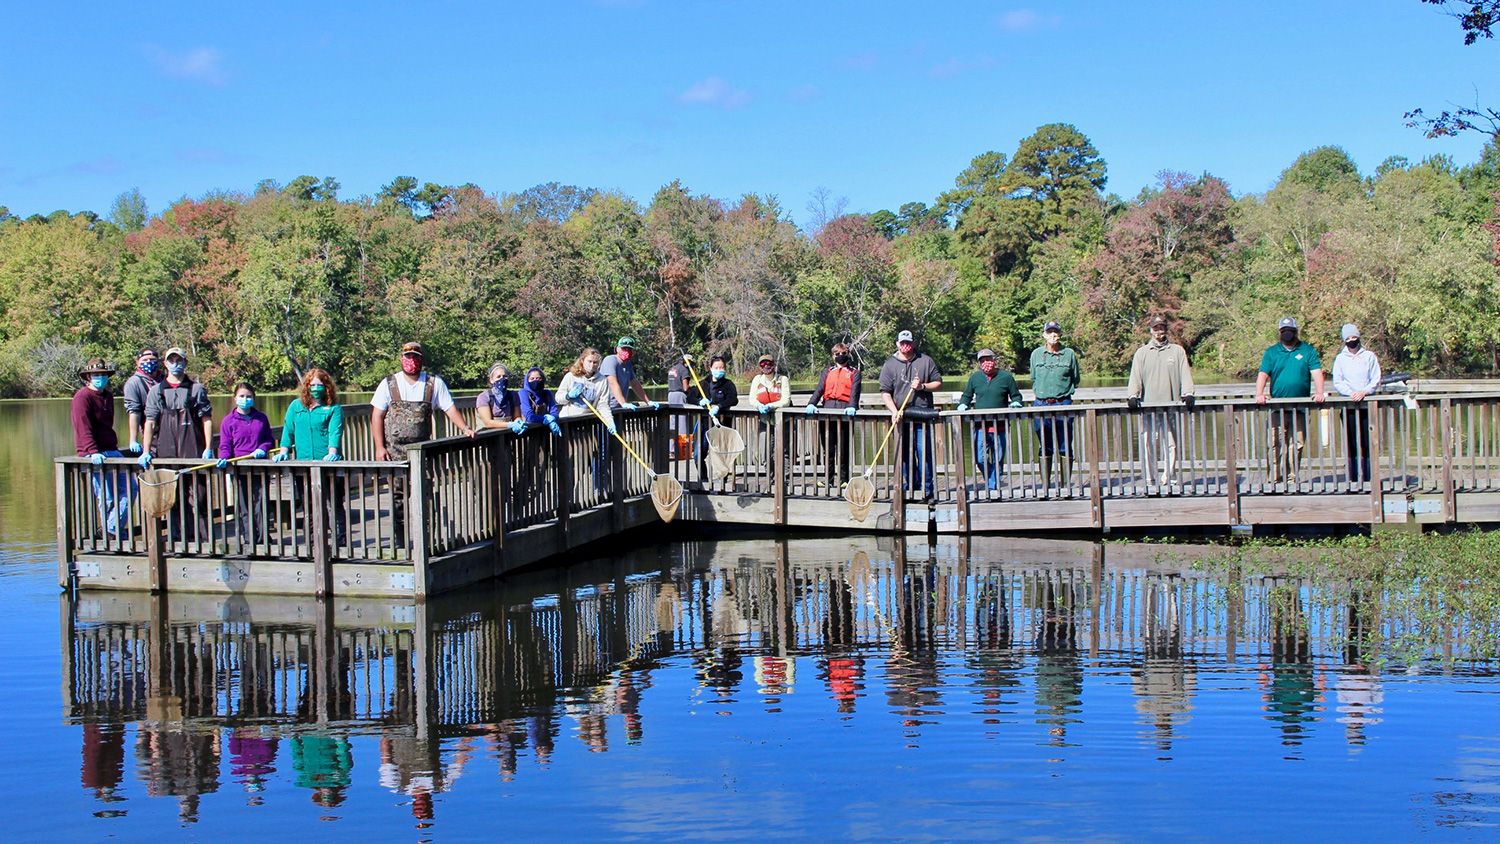 At Lake Raleigh, students stand on a dock after a day of collecting data about fish populations.